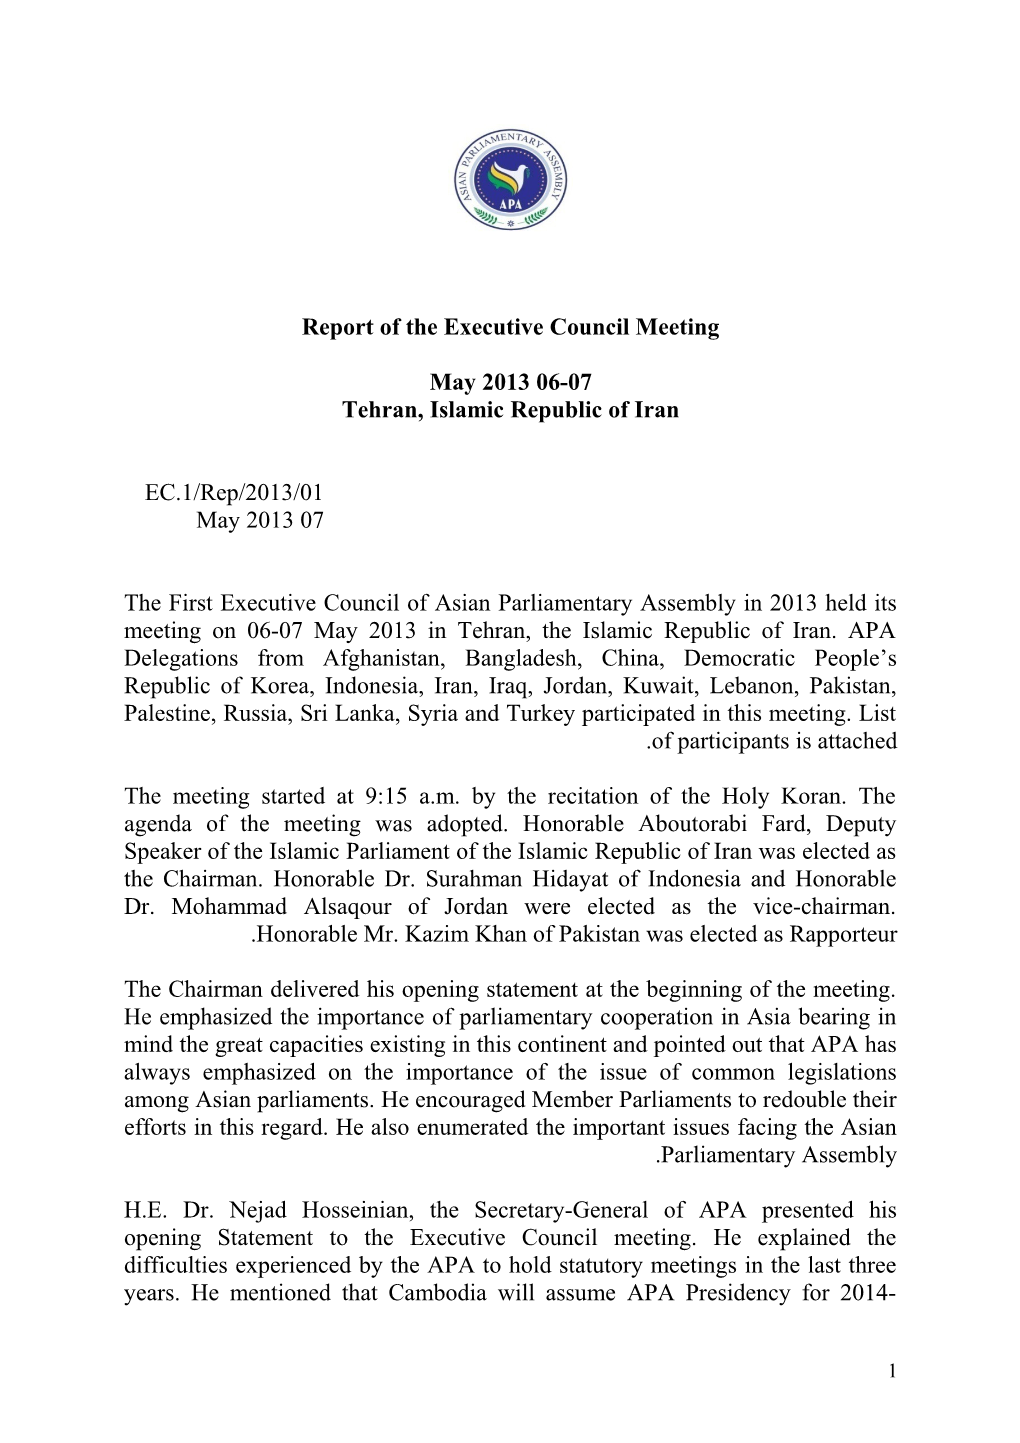 Report of Theexecutive Council Meeting